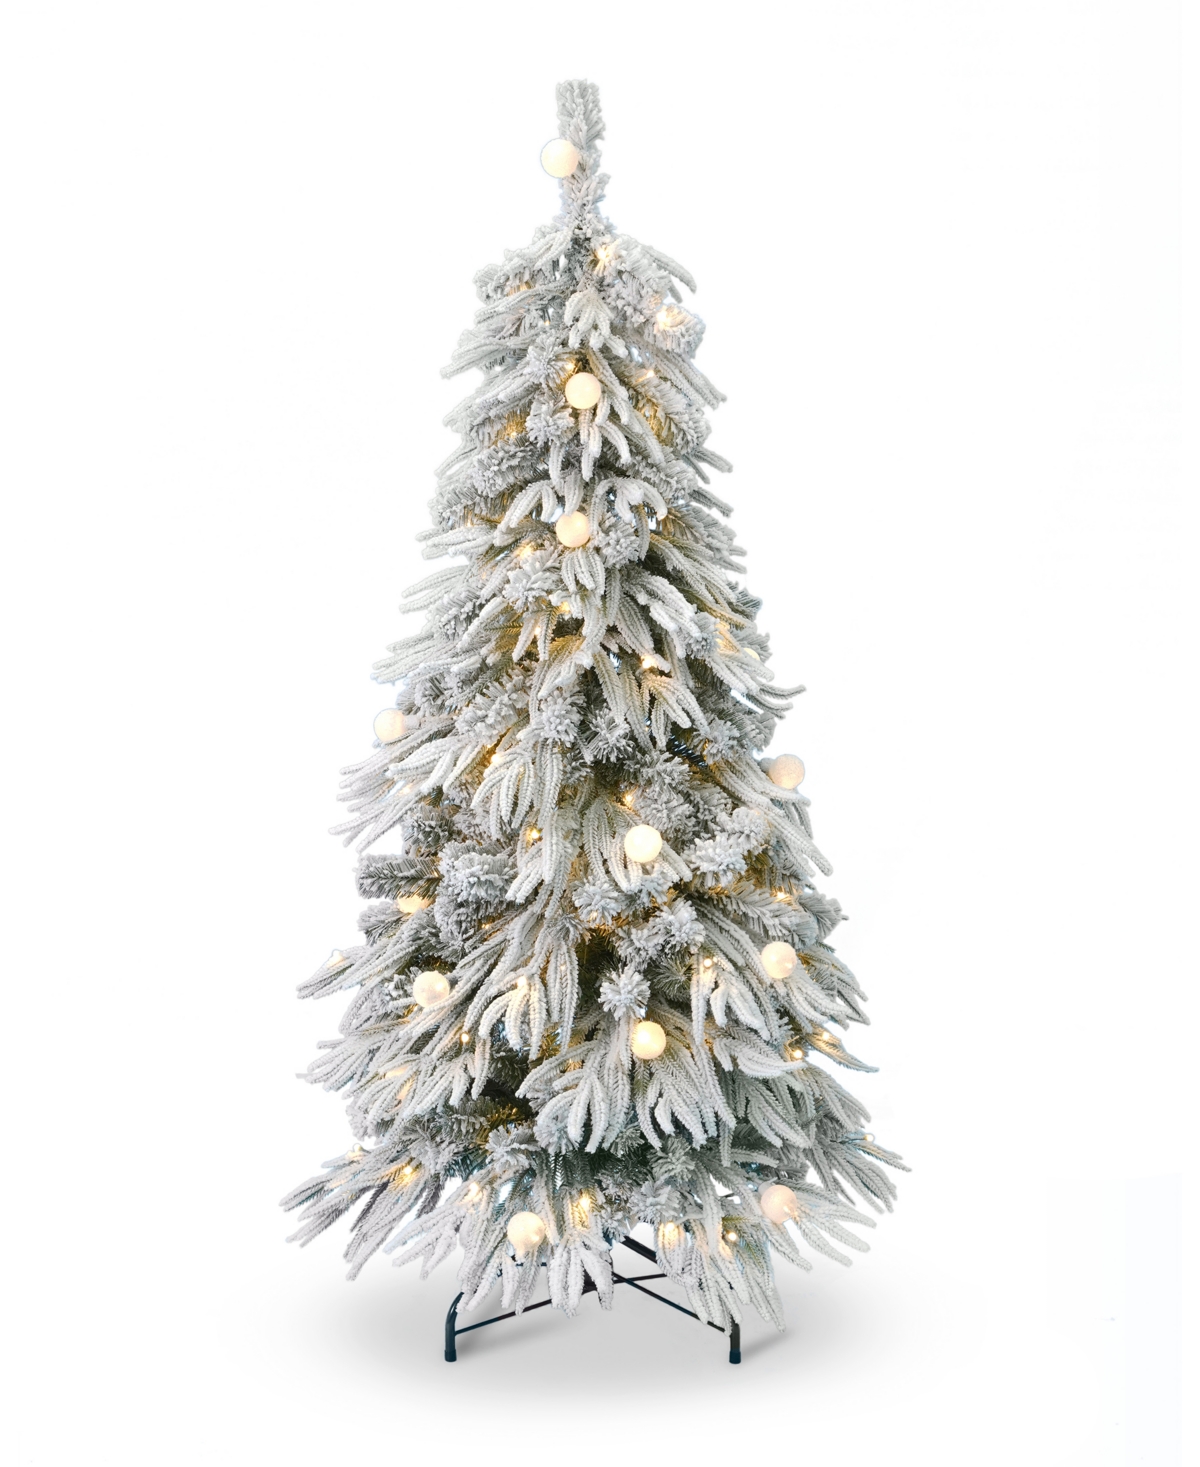 Frosted Acadia 5' Pre-Lit Flocked Pe Mixed Pvc Slim Tree with Metal Stand, 1305 Tips, 150 Changing Led Lights - White